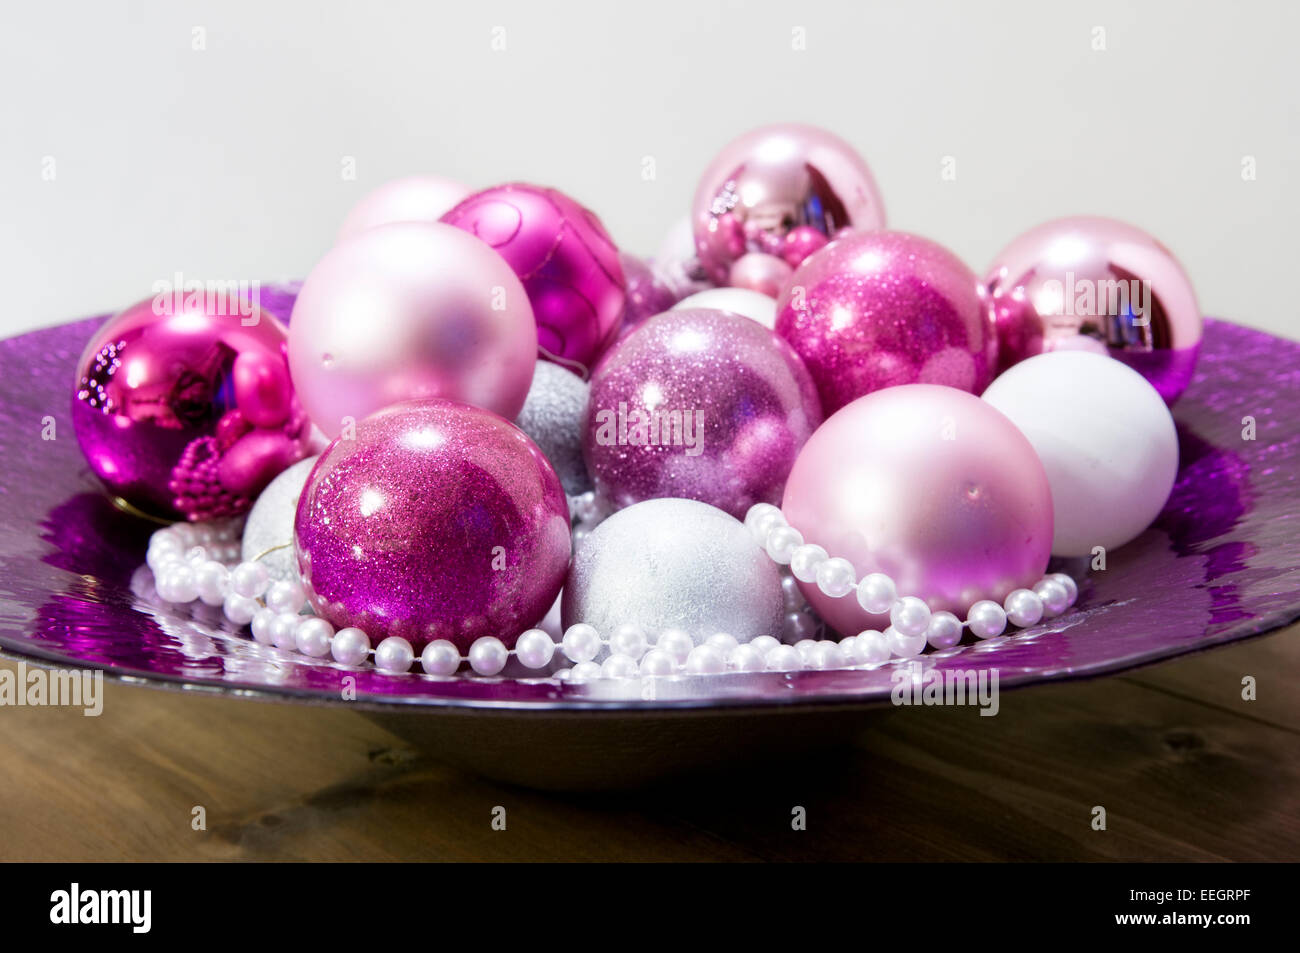 Festive purple bowl filled with Christmas baubles and beads Stock Photo